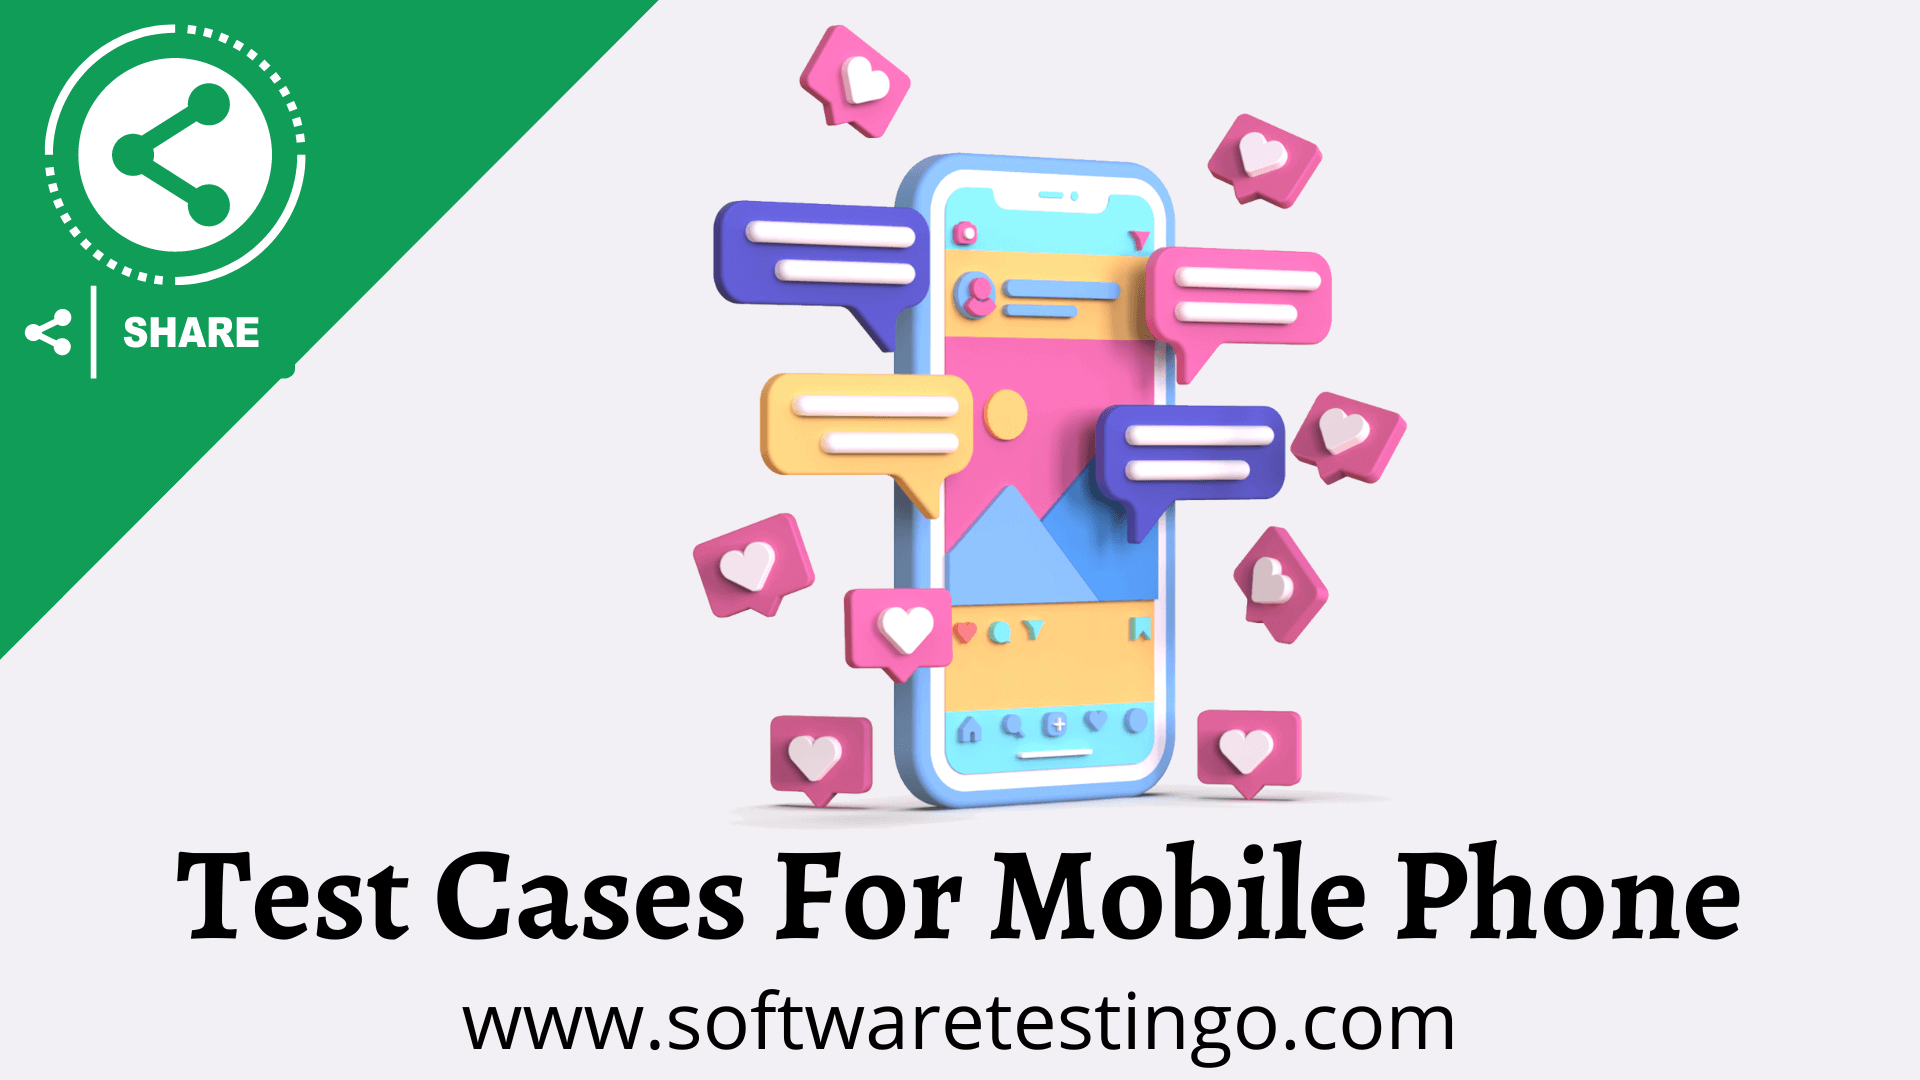 Test Cases For Mobile Phone